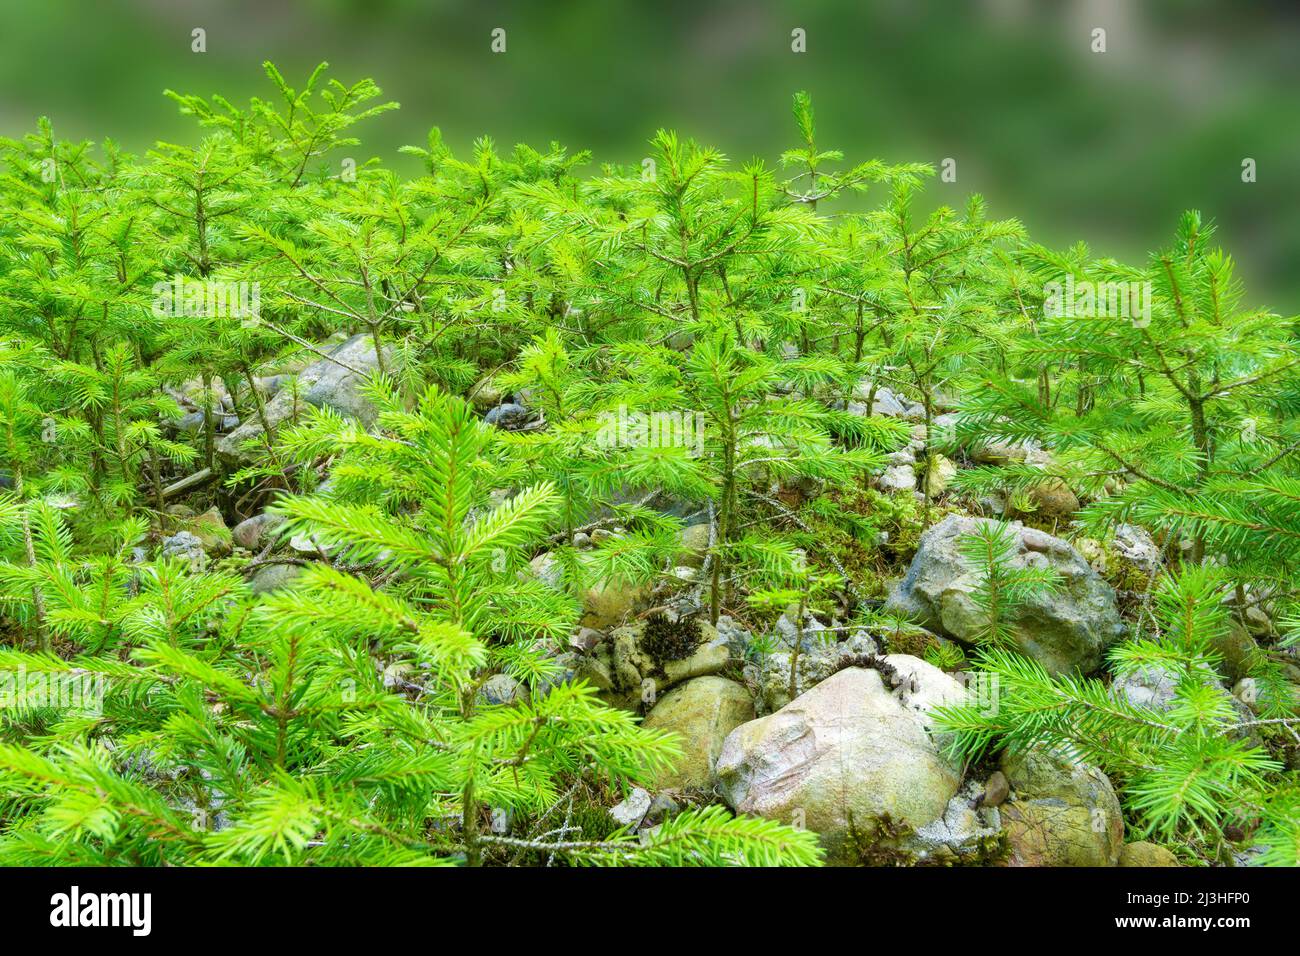 Fresh green forest with young conifer saplings, Bavaria, Germany Stock Photo